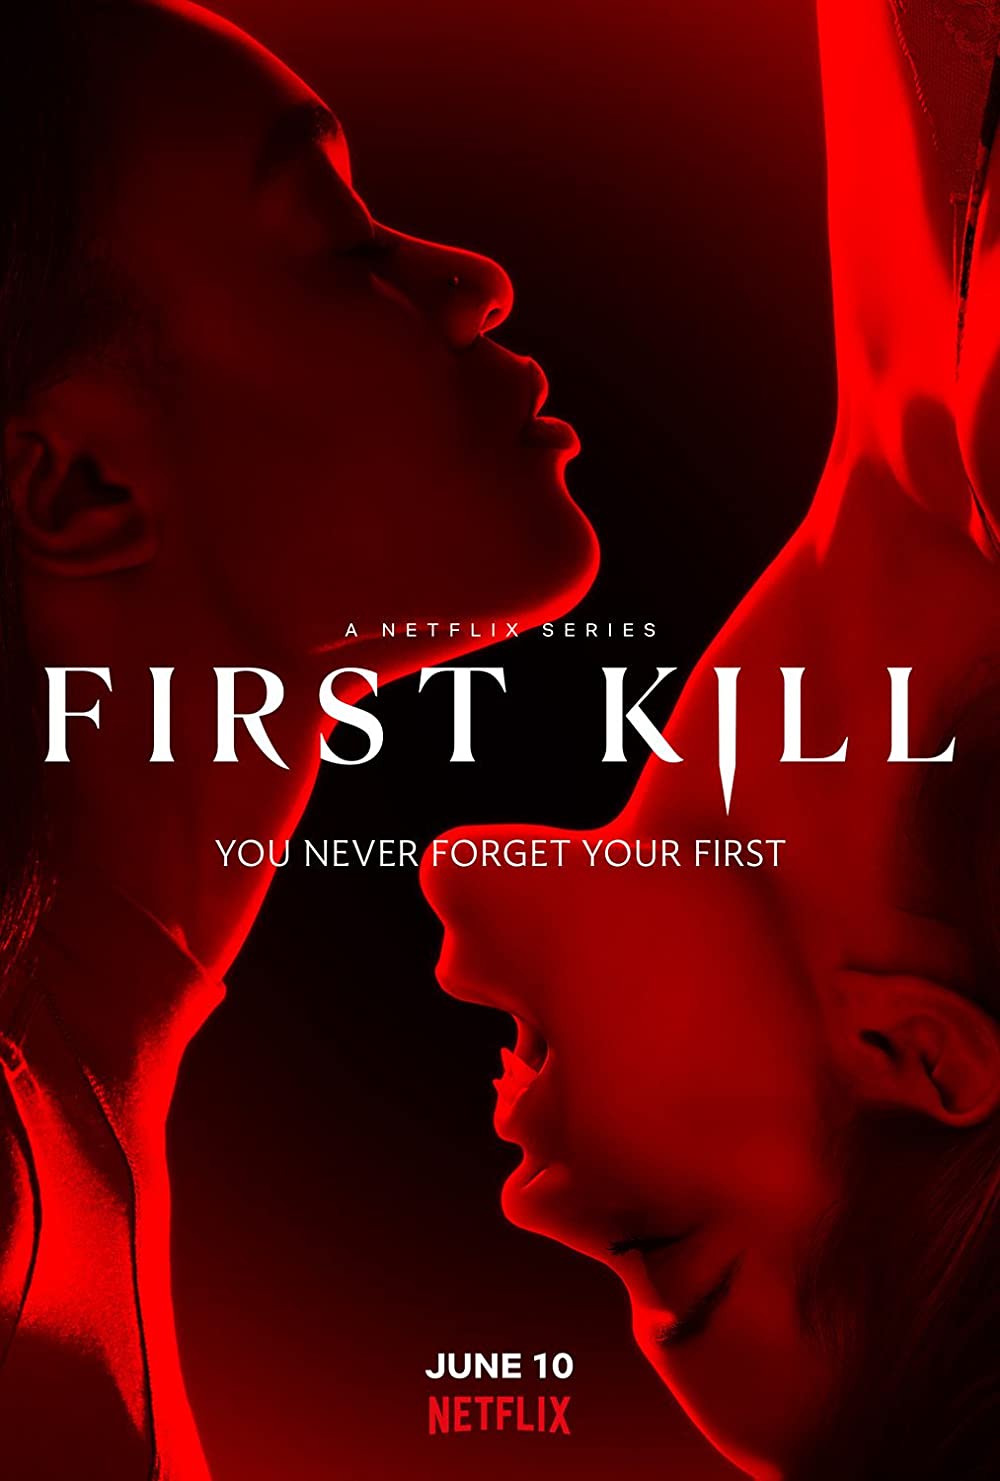 Is First Kill (2022) available on Netflix